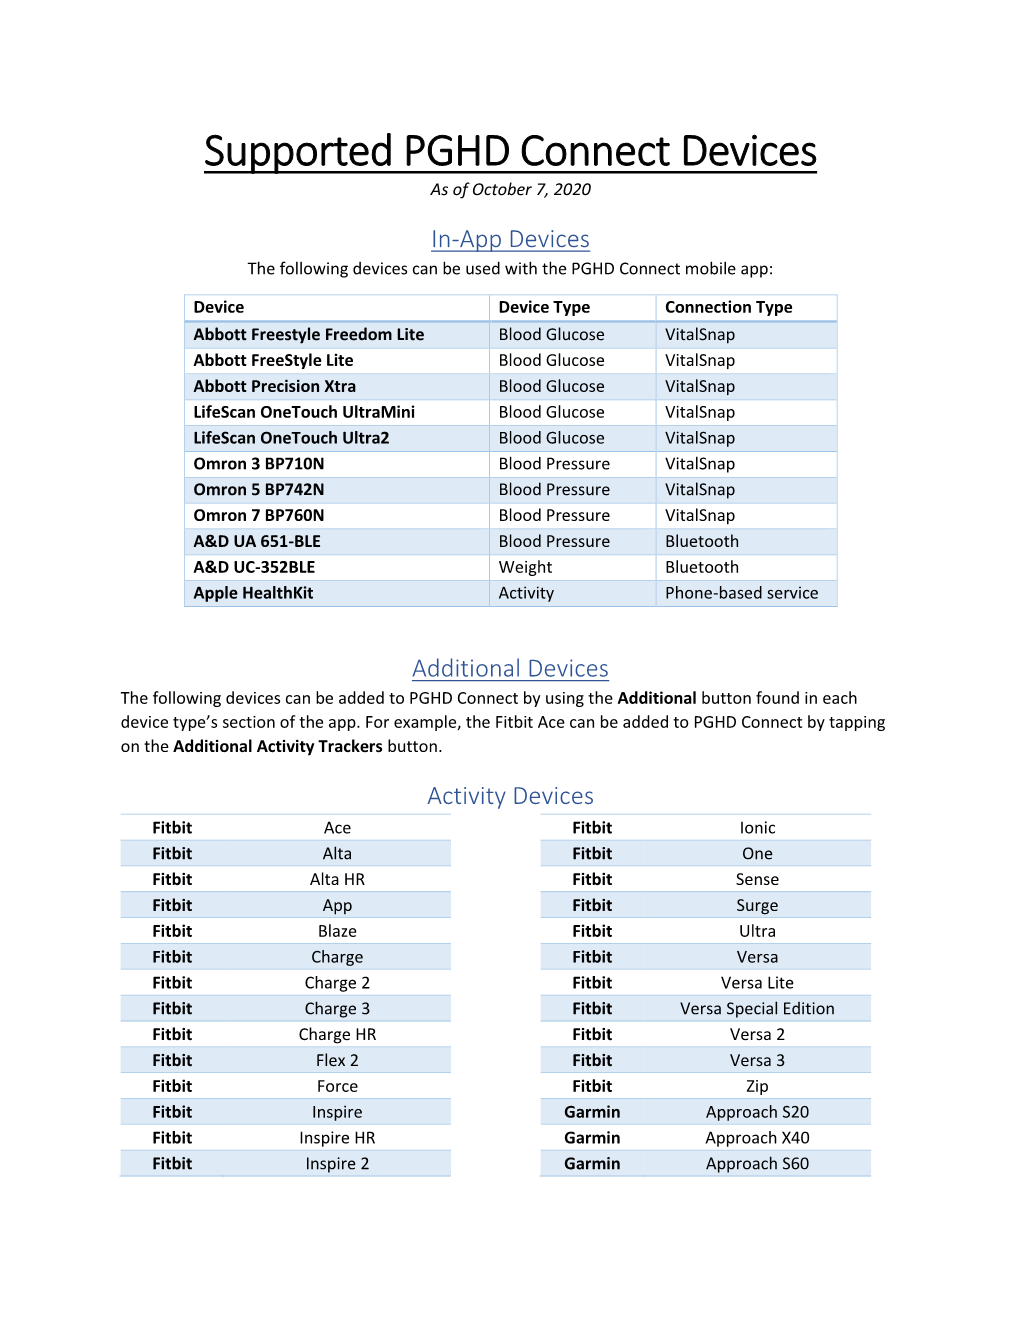 Supported PGHD Connect Devices As of October 7, 2020